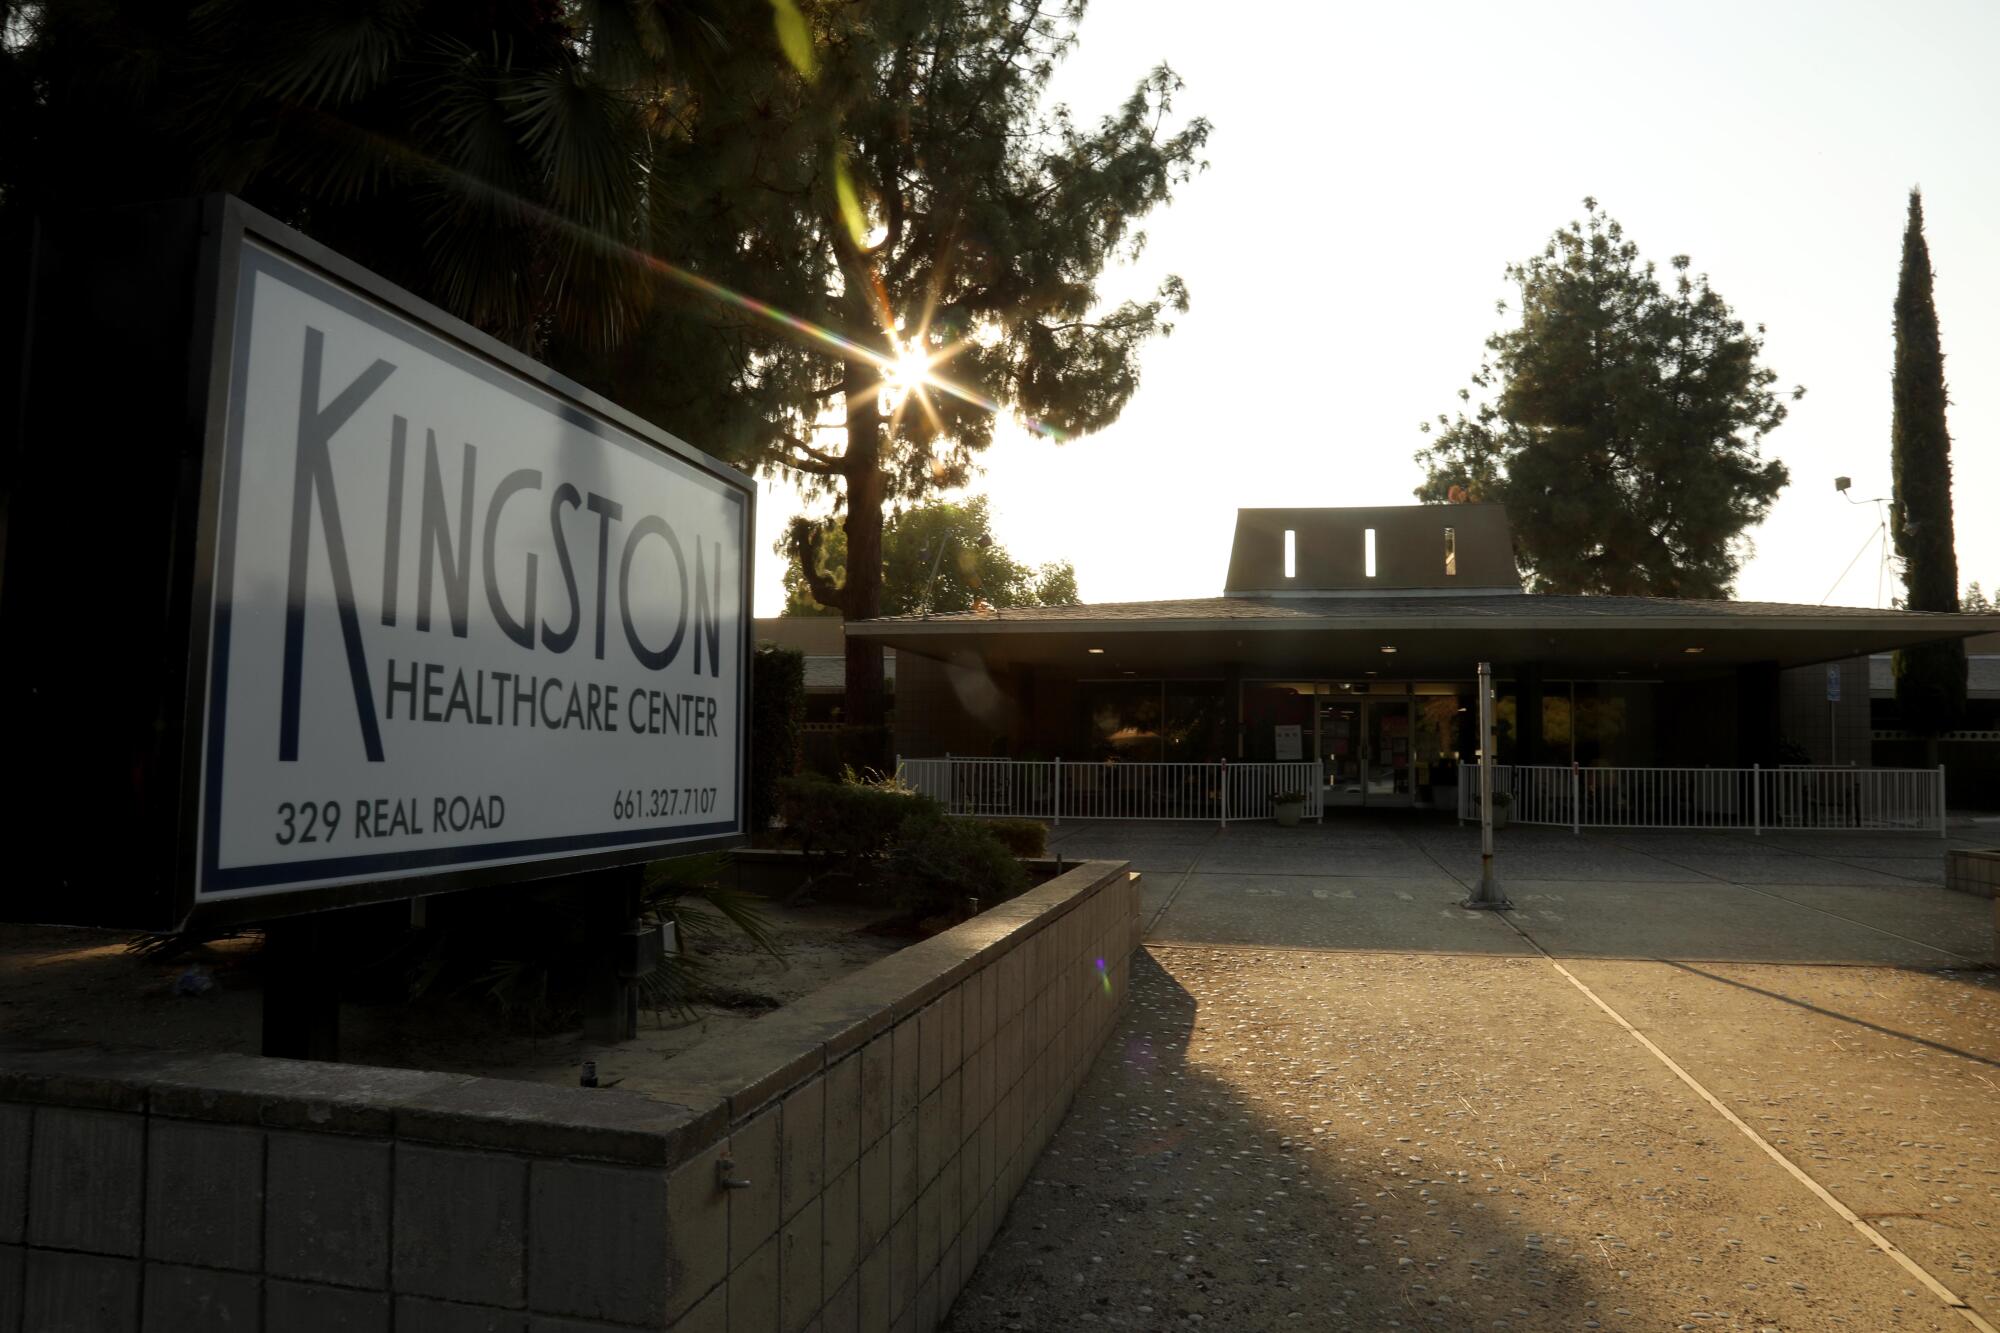 During a COVID outbreak at Kingston Healthcare Center, 104 residents caught the virus.